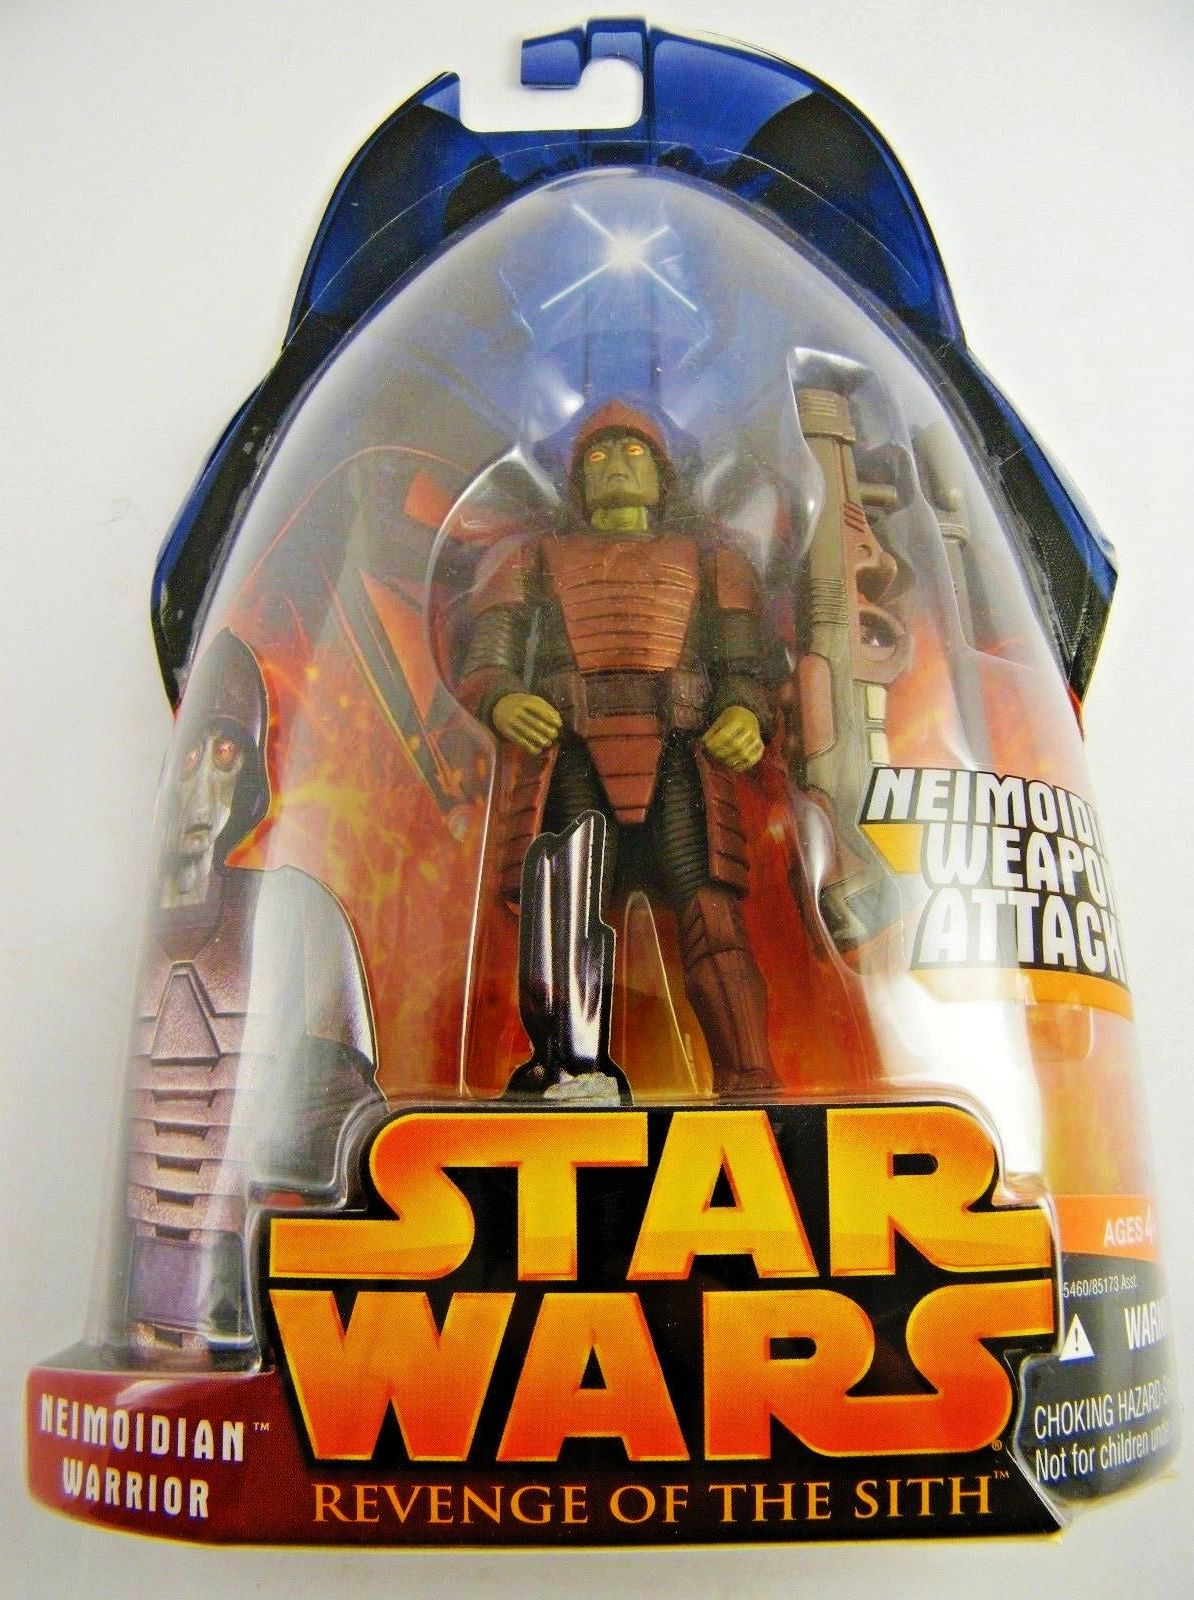 Neimoidian Warrior Star Wars Revenge Of The Sith Collection 2005 